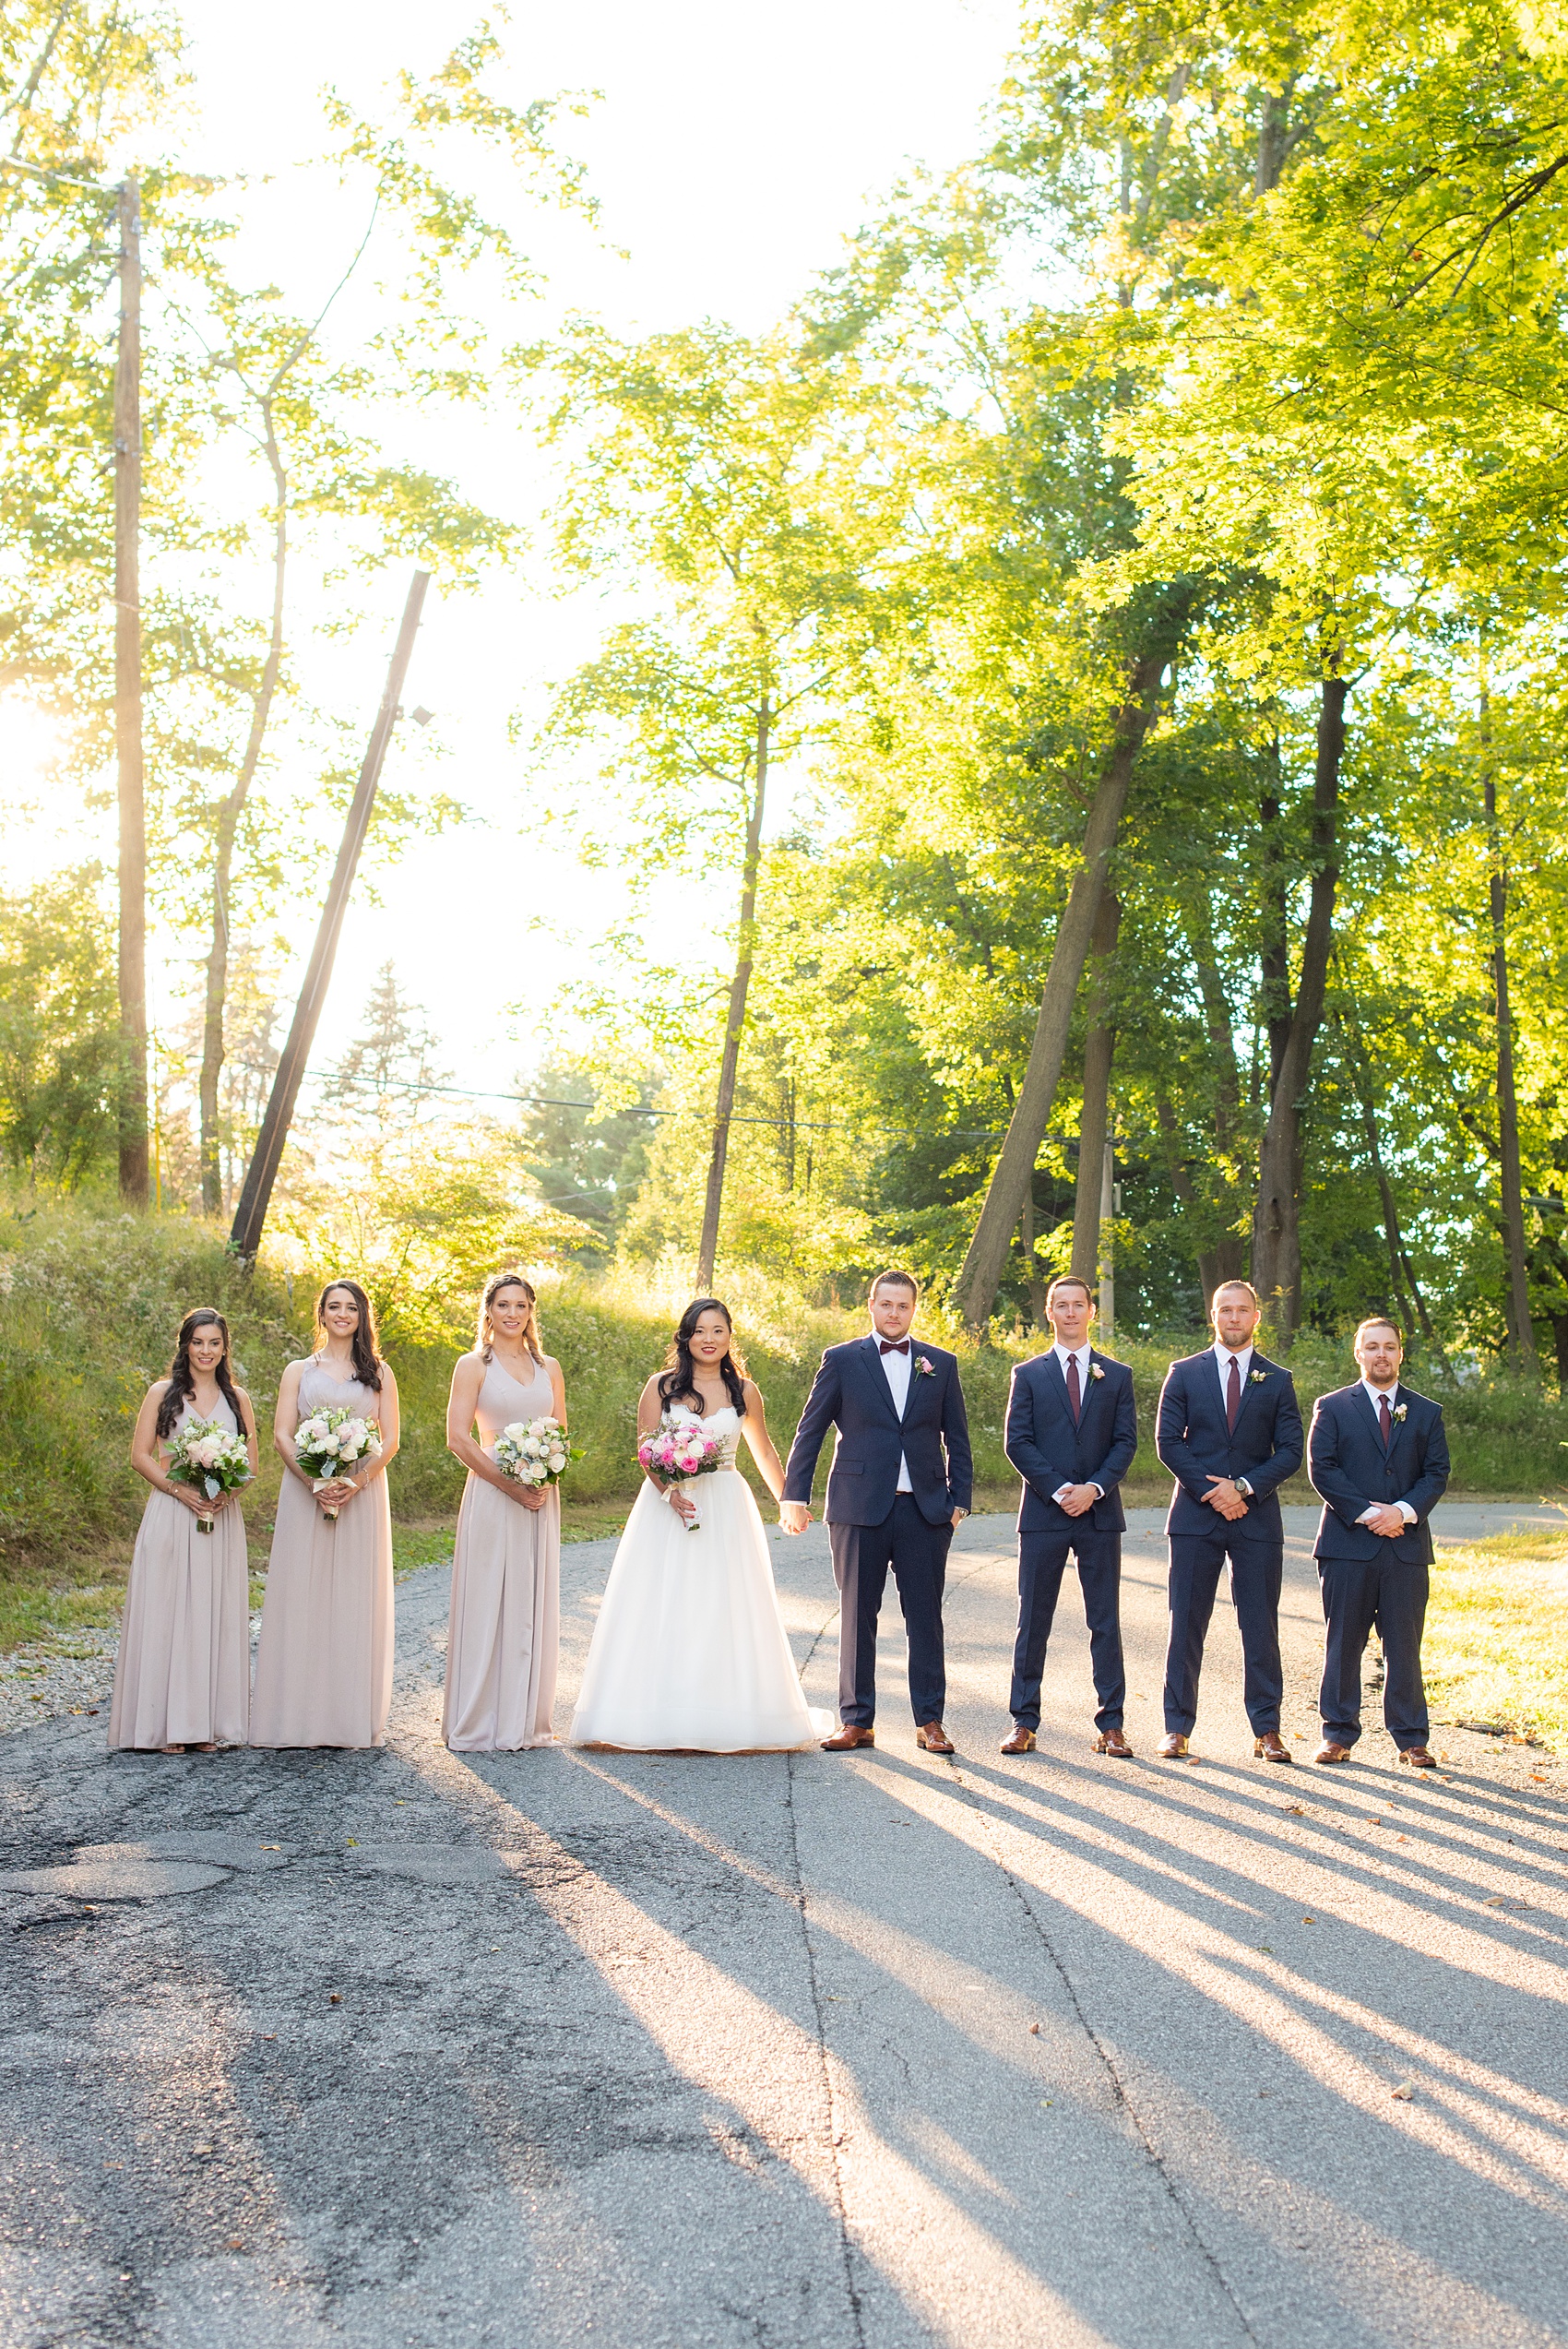 Wedding photos at Crabtree's Kittle House in Chappaqua, New York by Mikkel Paige Photography. This venue in Westchester county was the perfect place to capture their creative pictures, with the bridesmaids in dusty rose gowns & men in custom blue suits. The historic home is very close to NYC & has a country-like setting. Click through for more inspiration from their fall day! #bluesuit #mikkelpaige #CrabtreesKittleHouse #WestchesterWeddingVenues #weddingparty #bridalparty #vogueweddingphotos